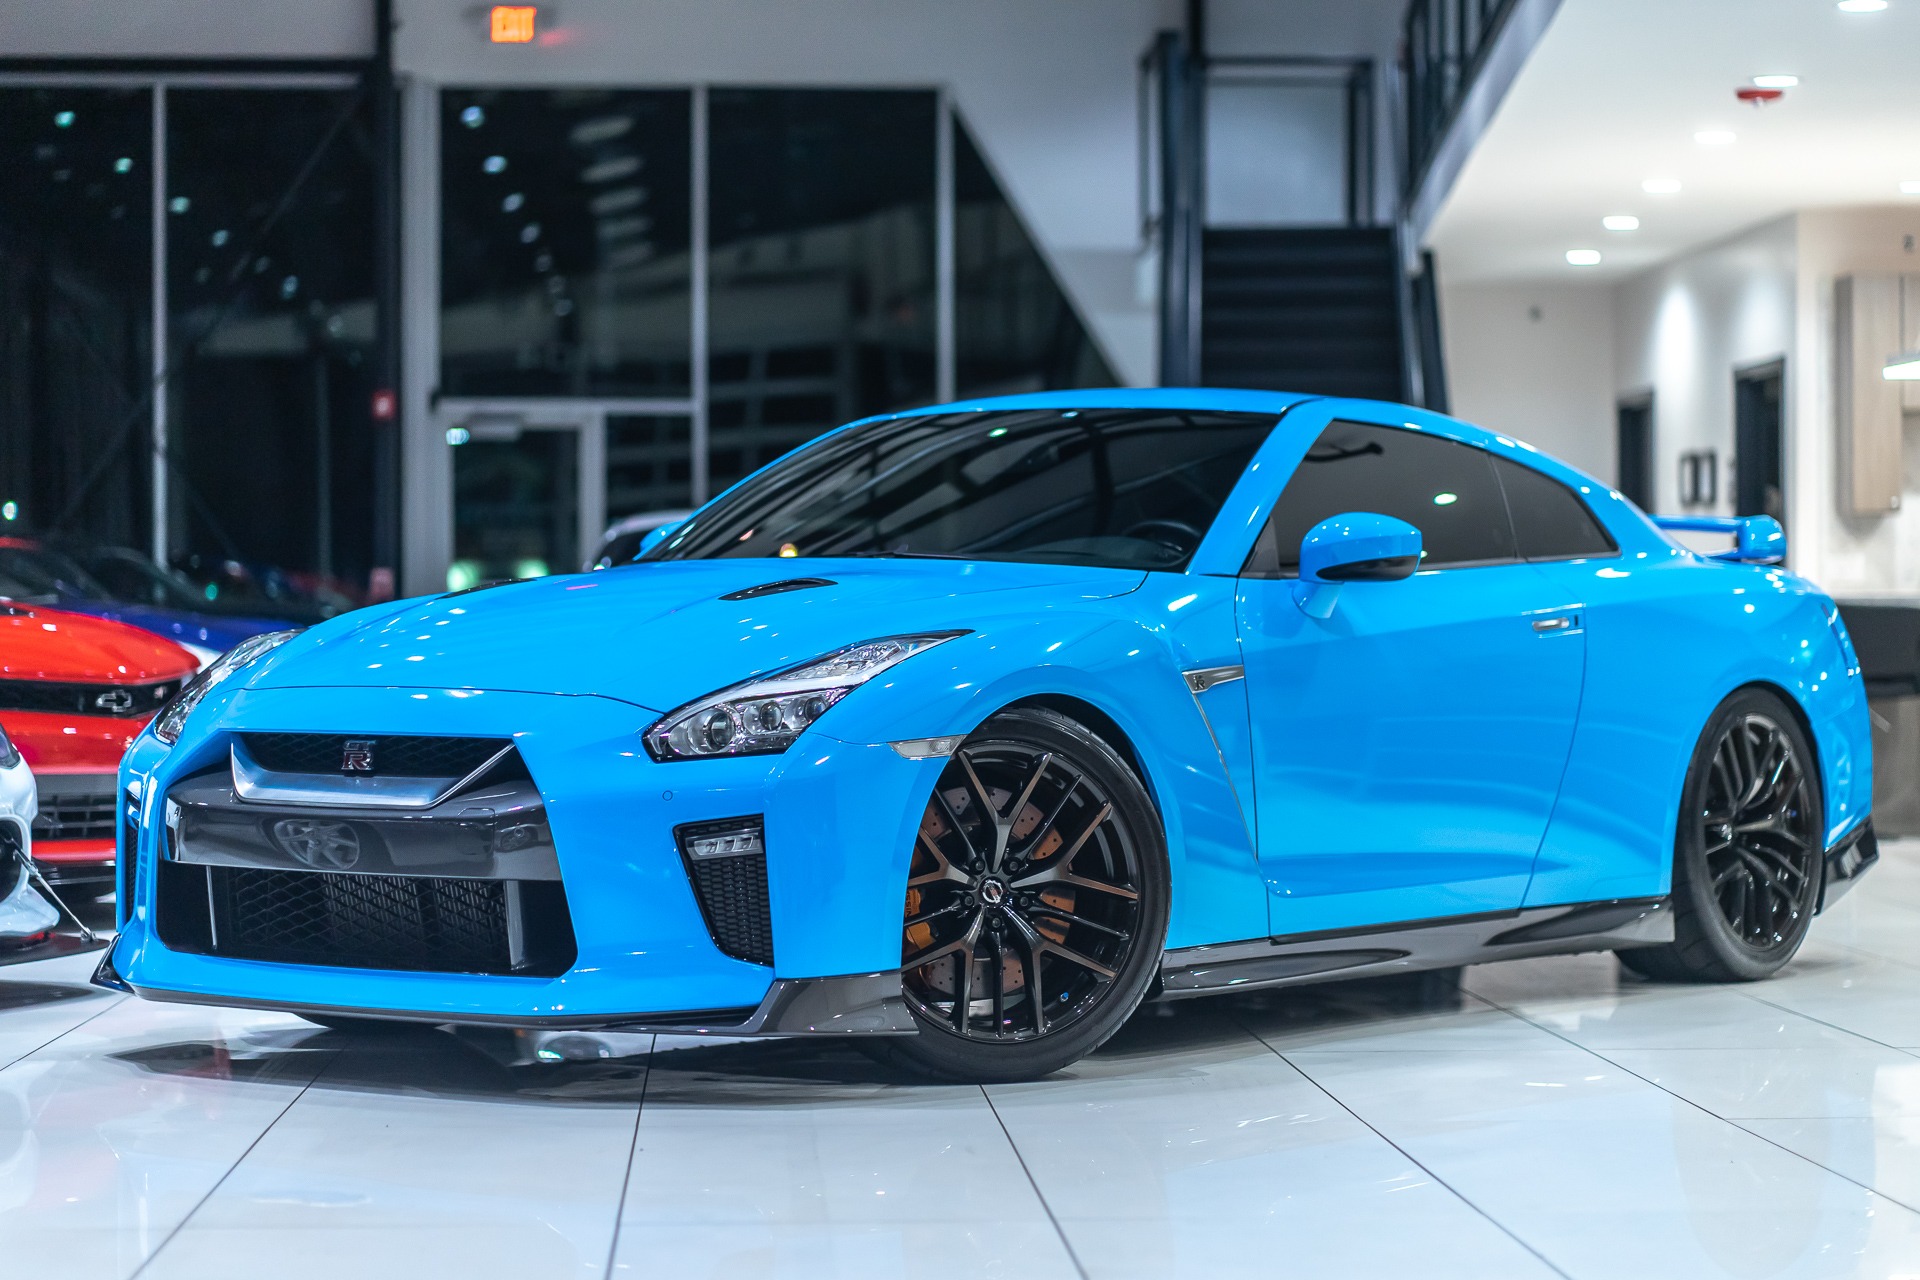 Used 2017 Nissan GT-R Premium Coupe FULL BOLT ON + FULL WRAP! For Sale